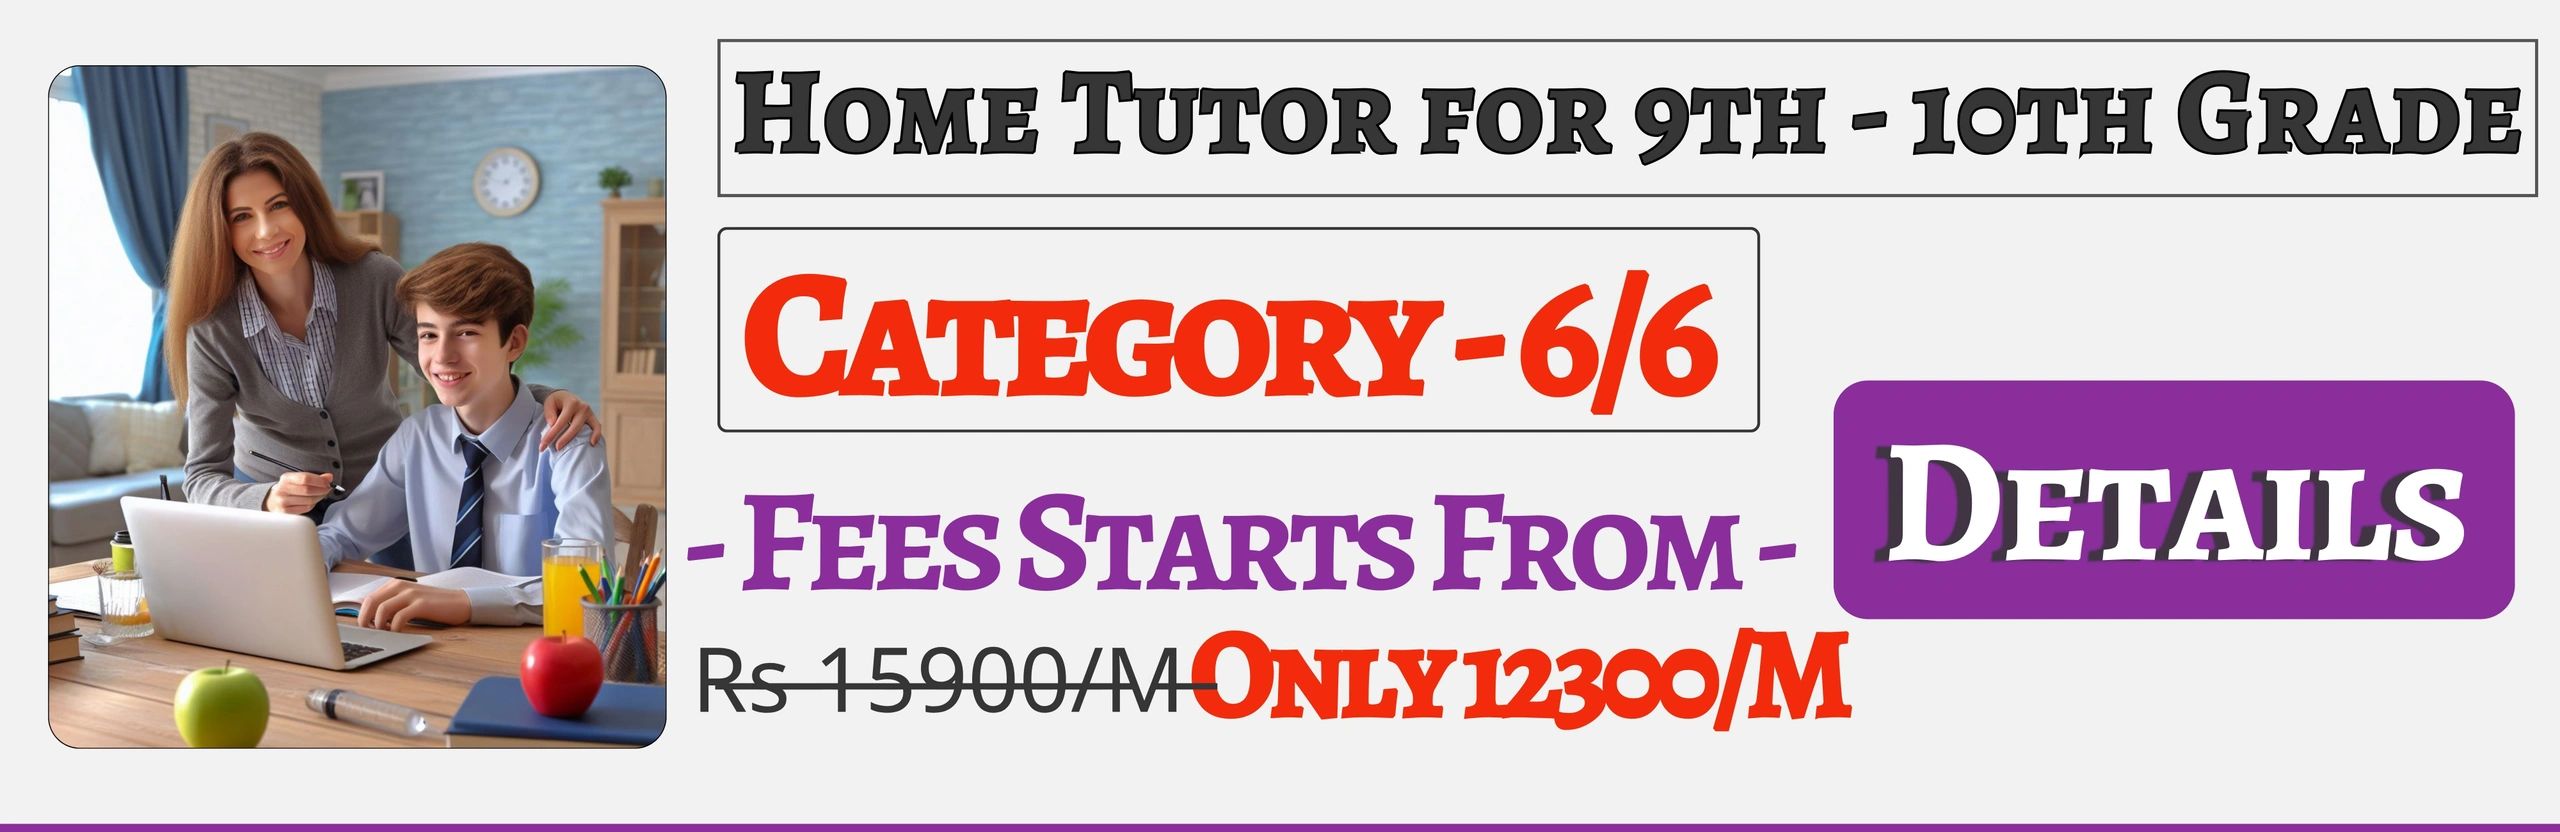 Book Best Home Tuition Tutors For 9th & 10th In Jaipur , Fees Only 12300/M